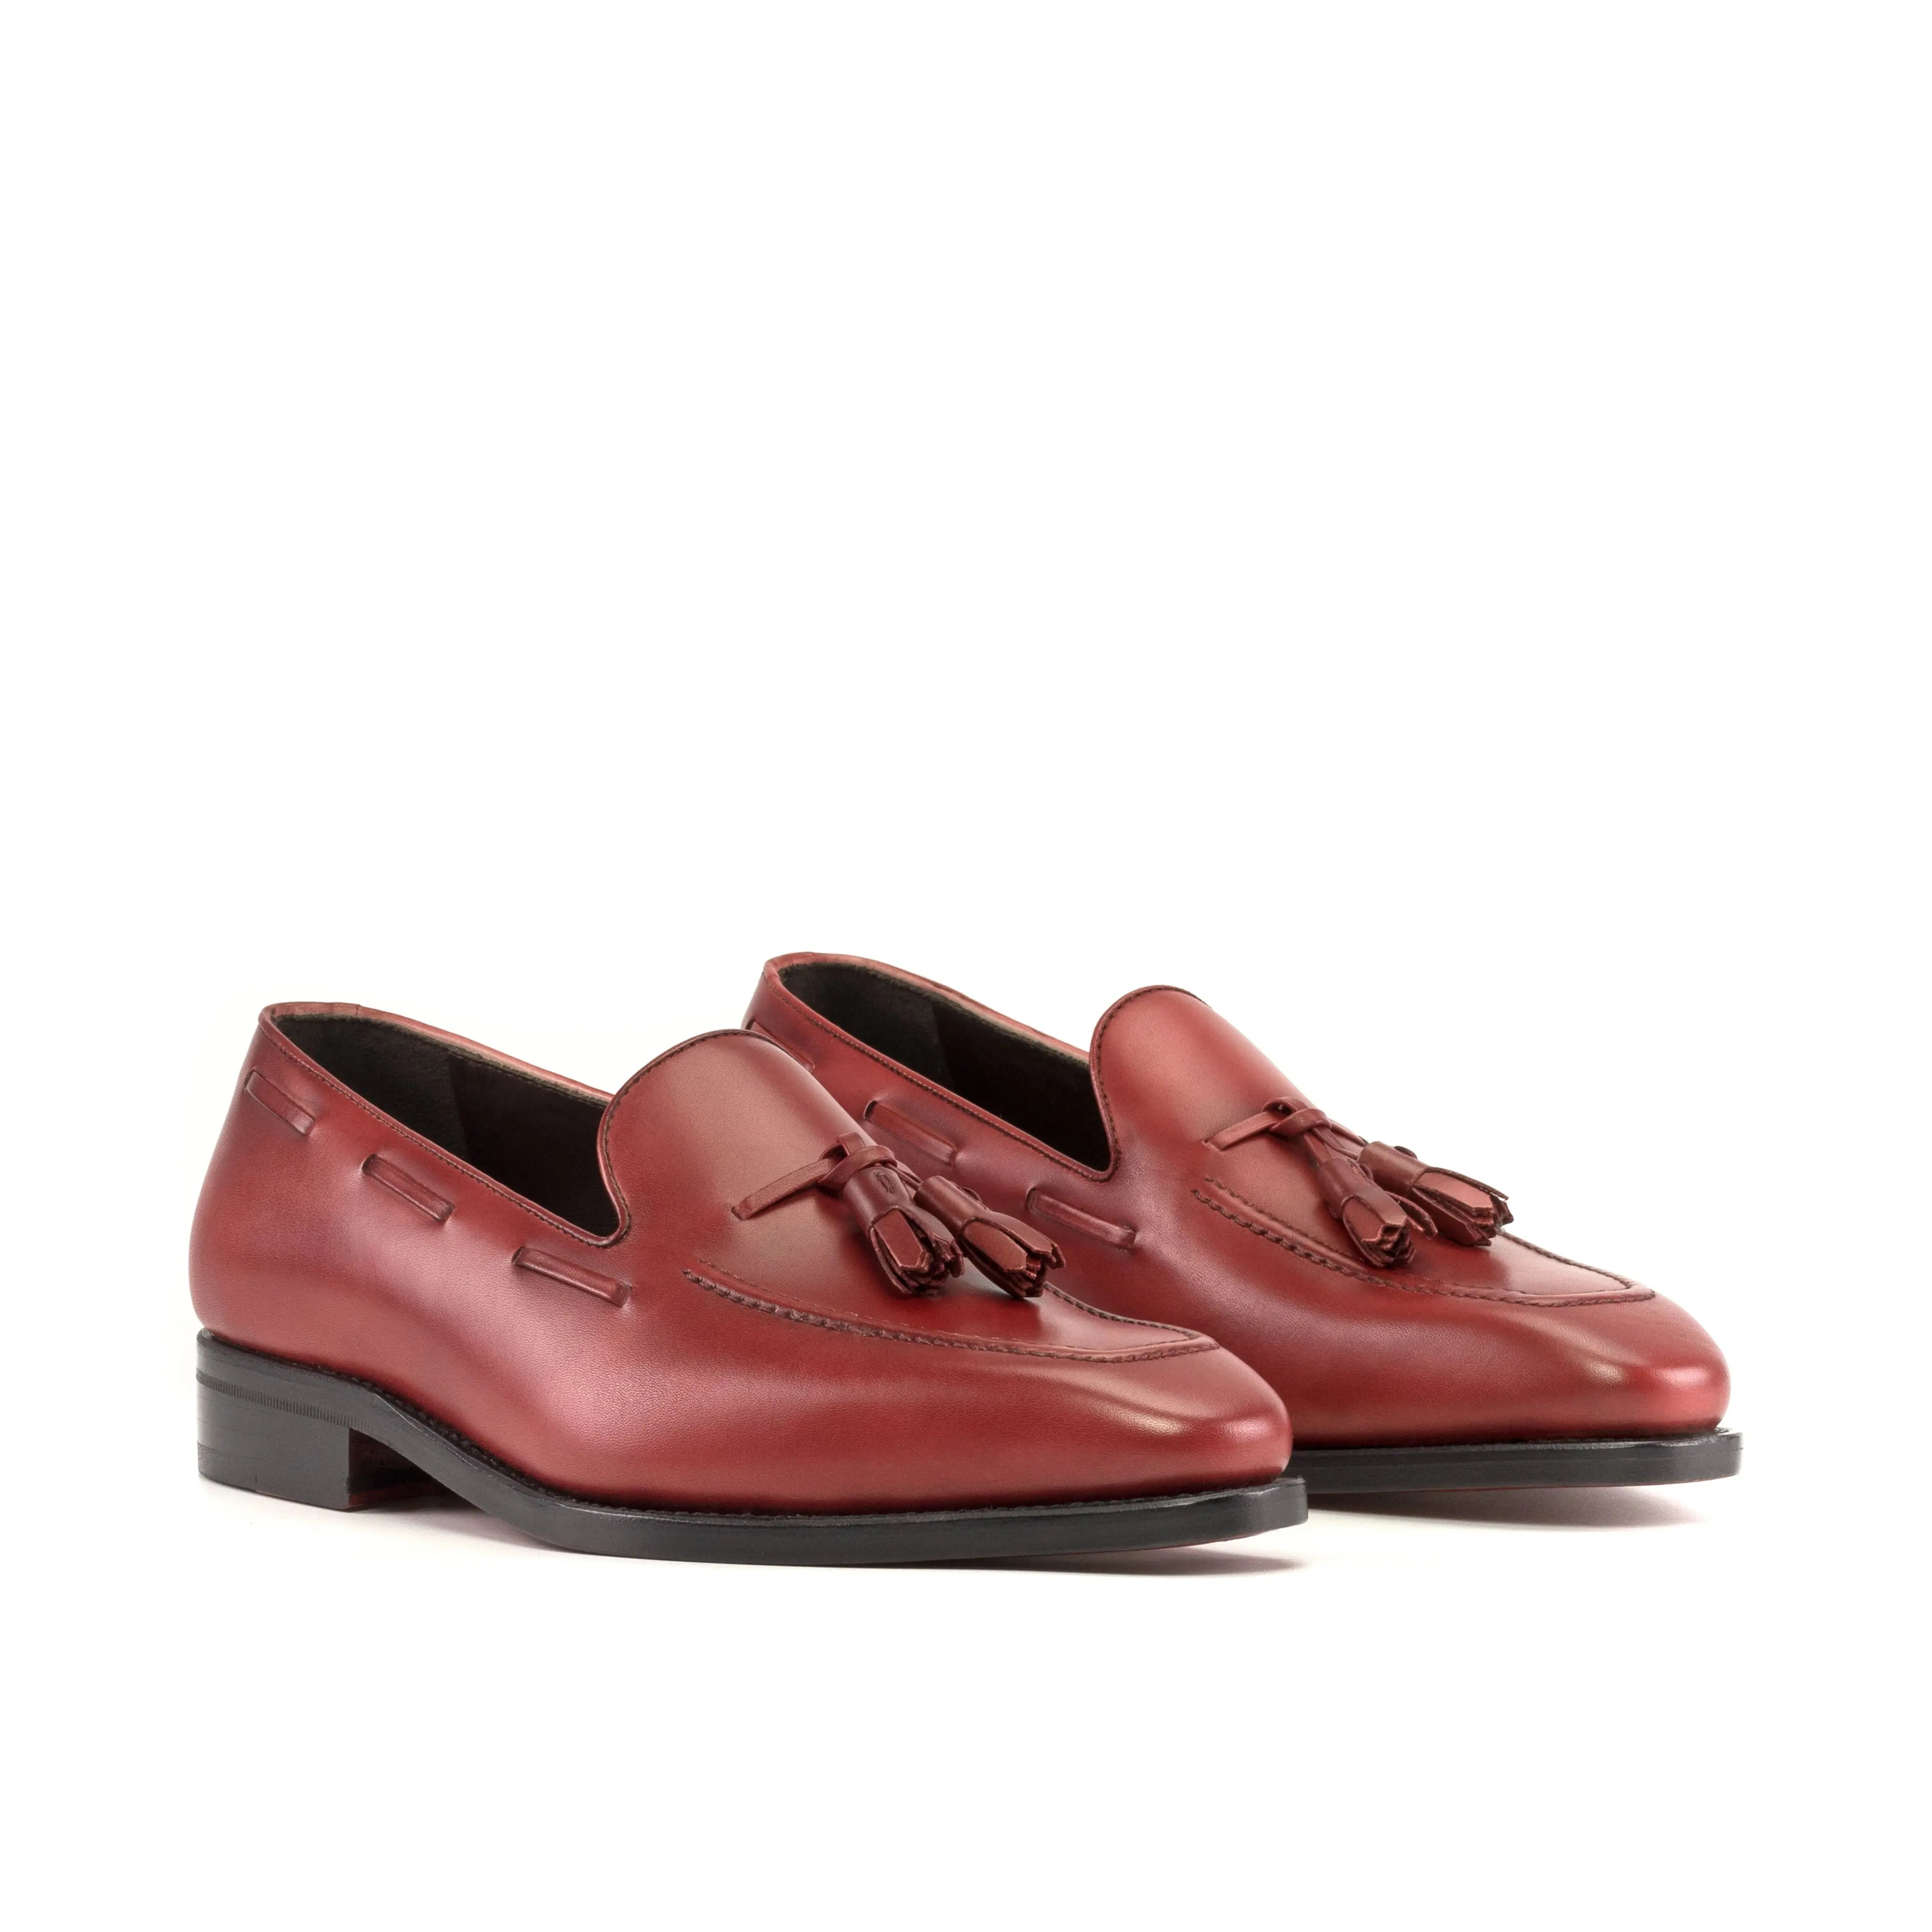 dapperfam luciano in red men's italian leather loafer